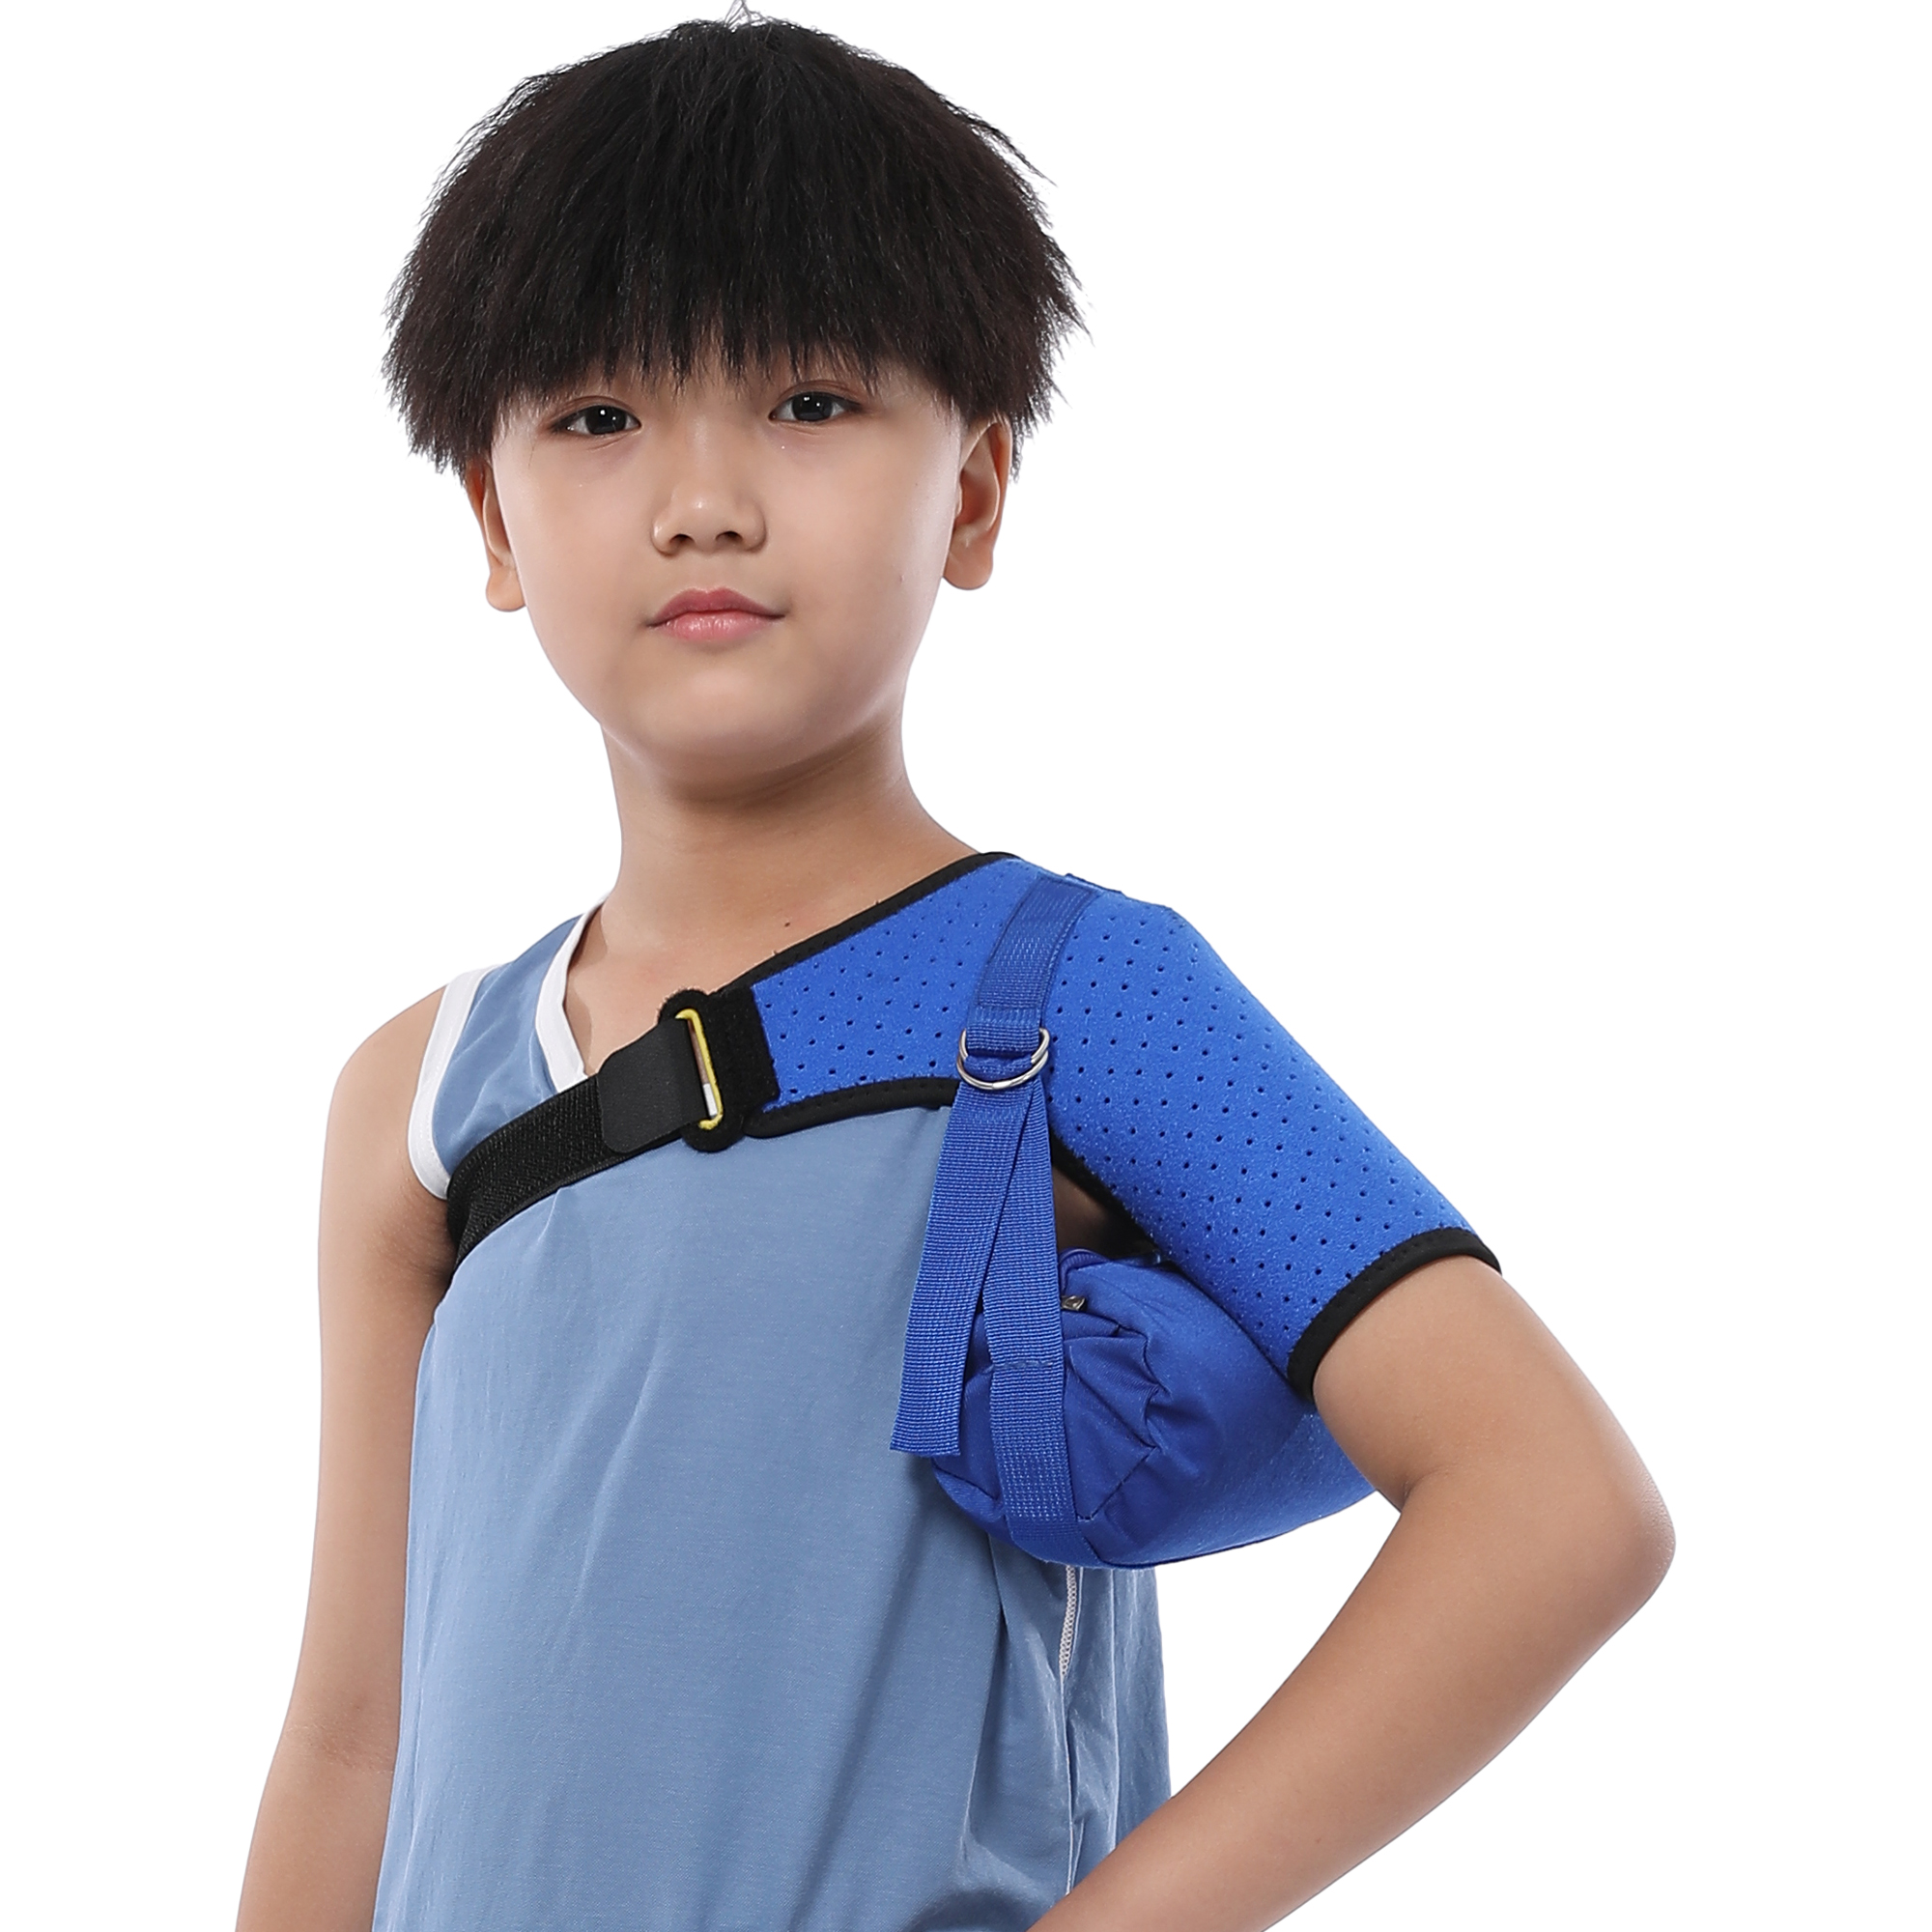 Made in China Good Quality Shoulder Support Brace Joint Compression Protection Shoulder Sleeves Immobilizer